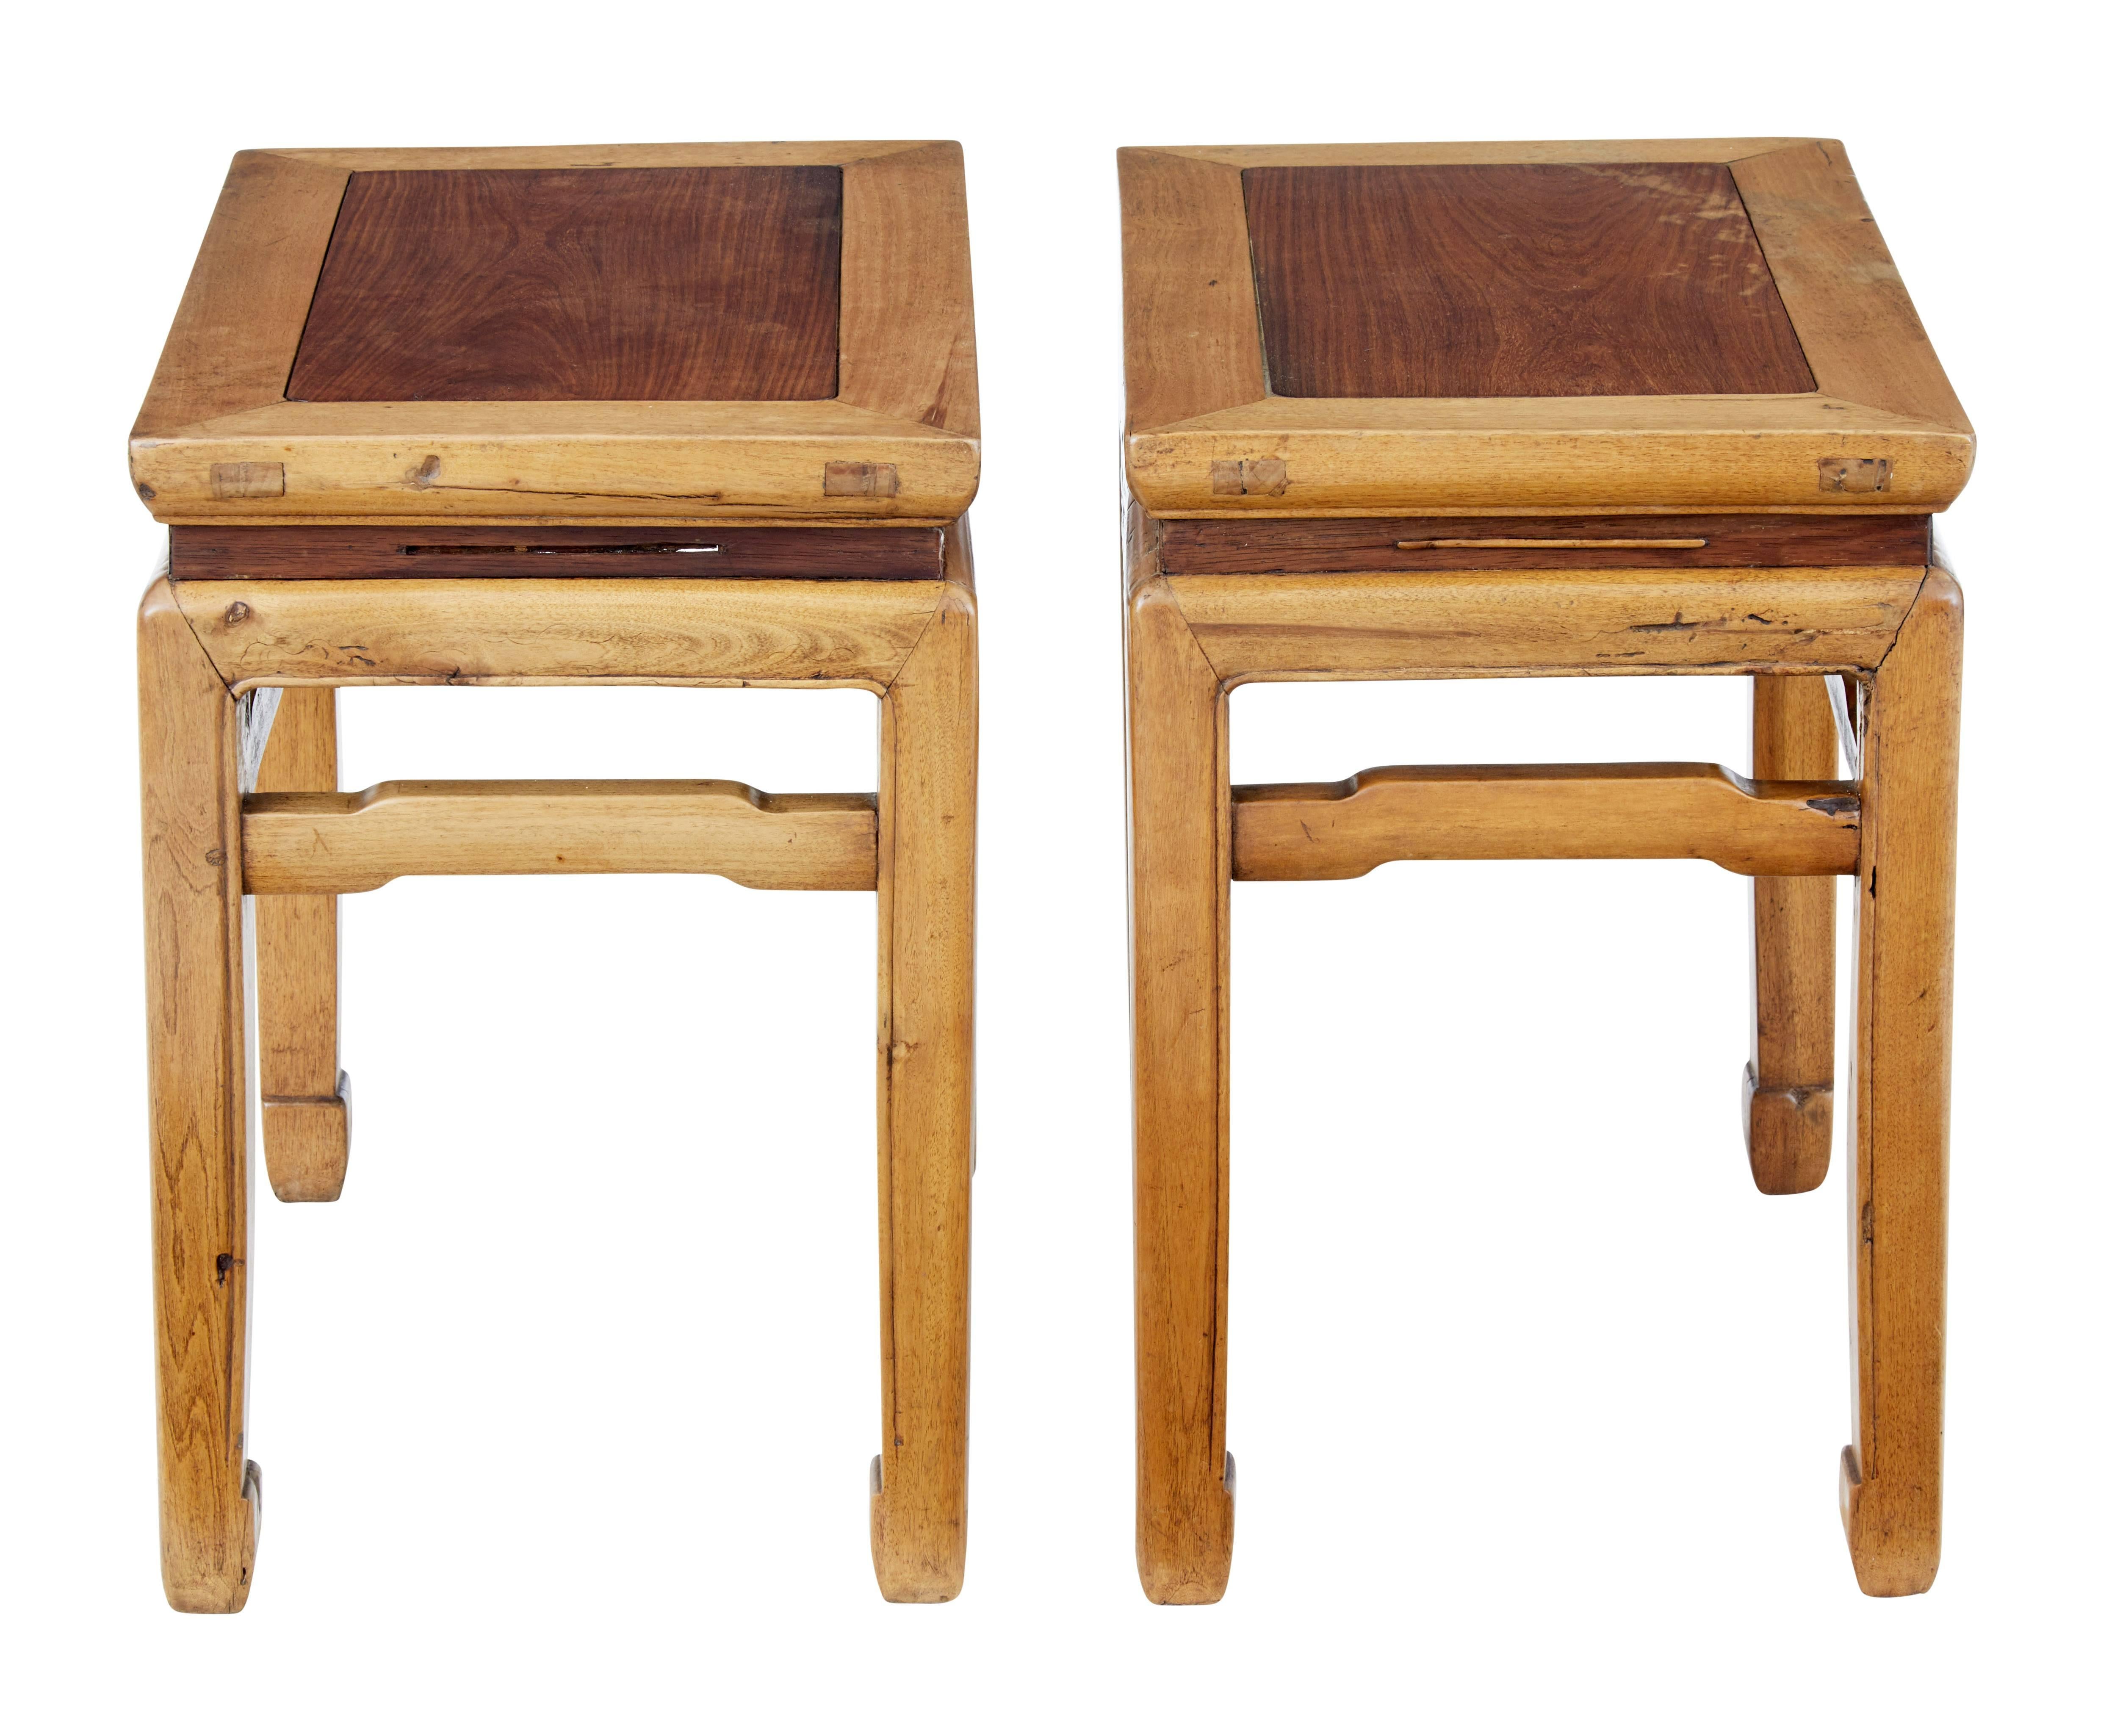 Pair of Chinese stools, circa 1880.

Good quality pair of Chinese export stools which would make ideal lamp tables.

Hardwood similar to elm, with contrasting inset top and band below the top surface.

Some staining to top and minor age